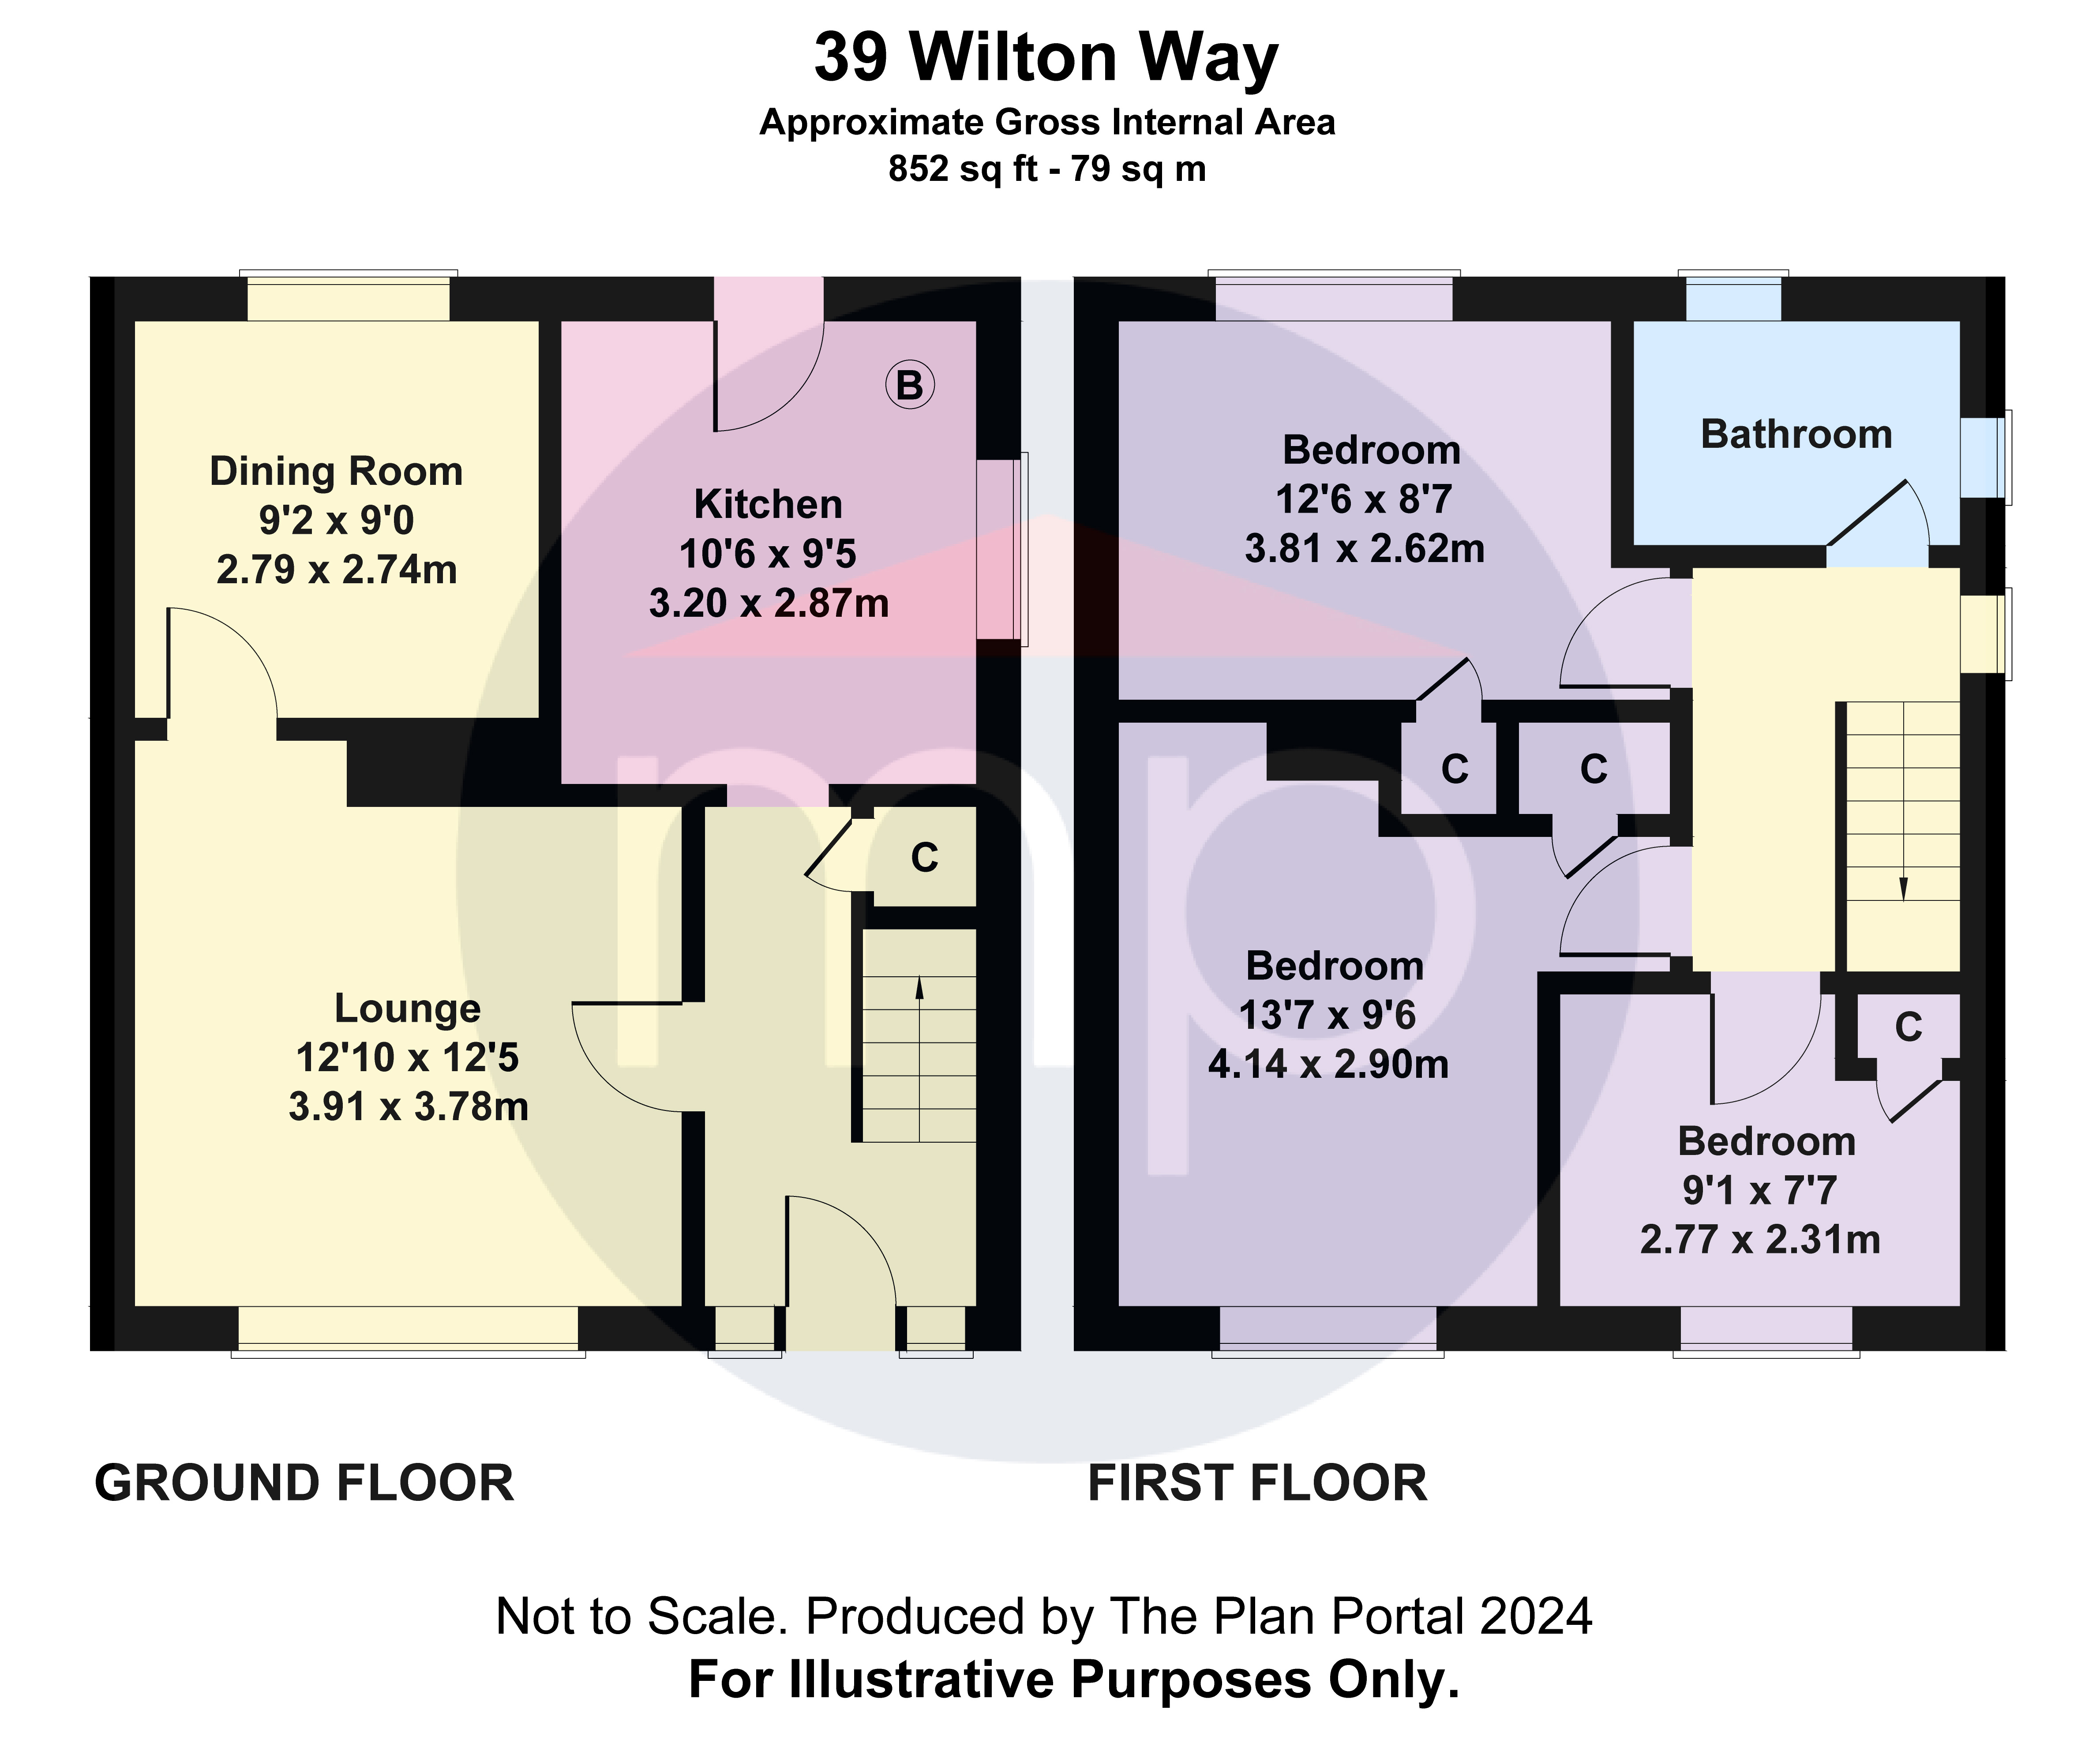 3 bed house for sale - Property floorplan